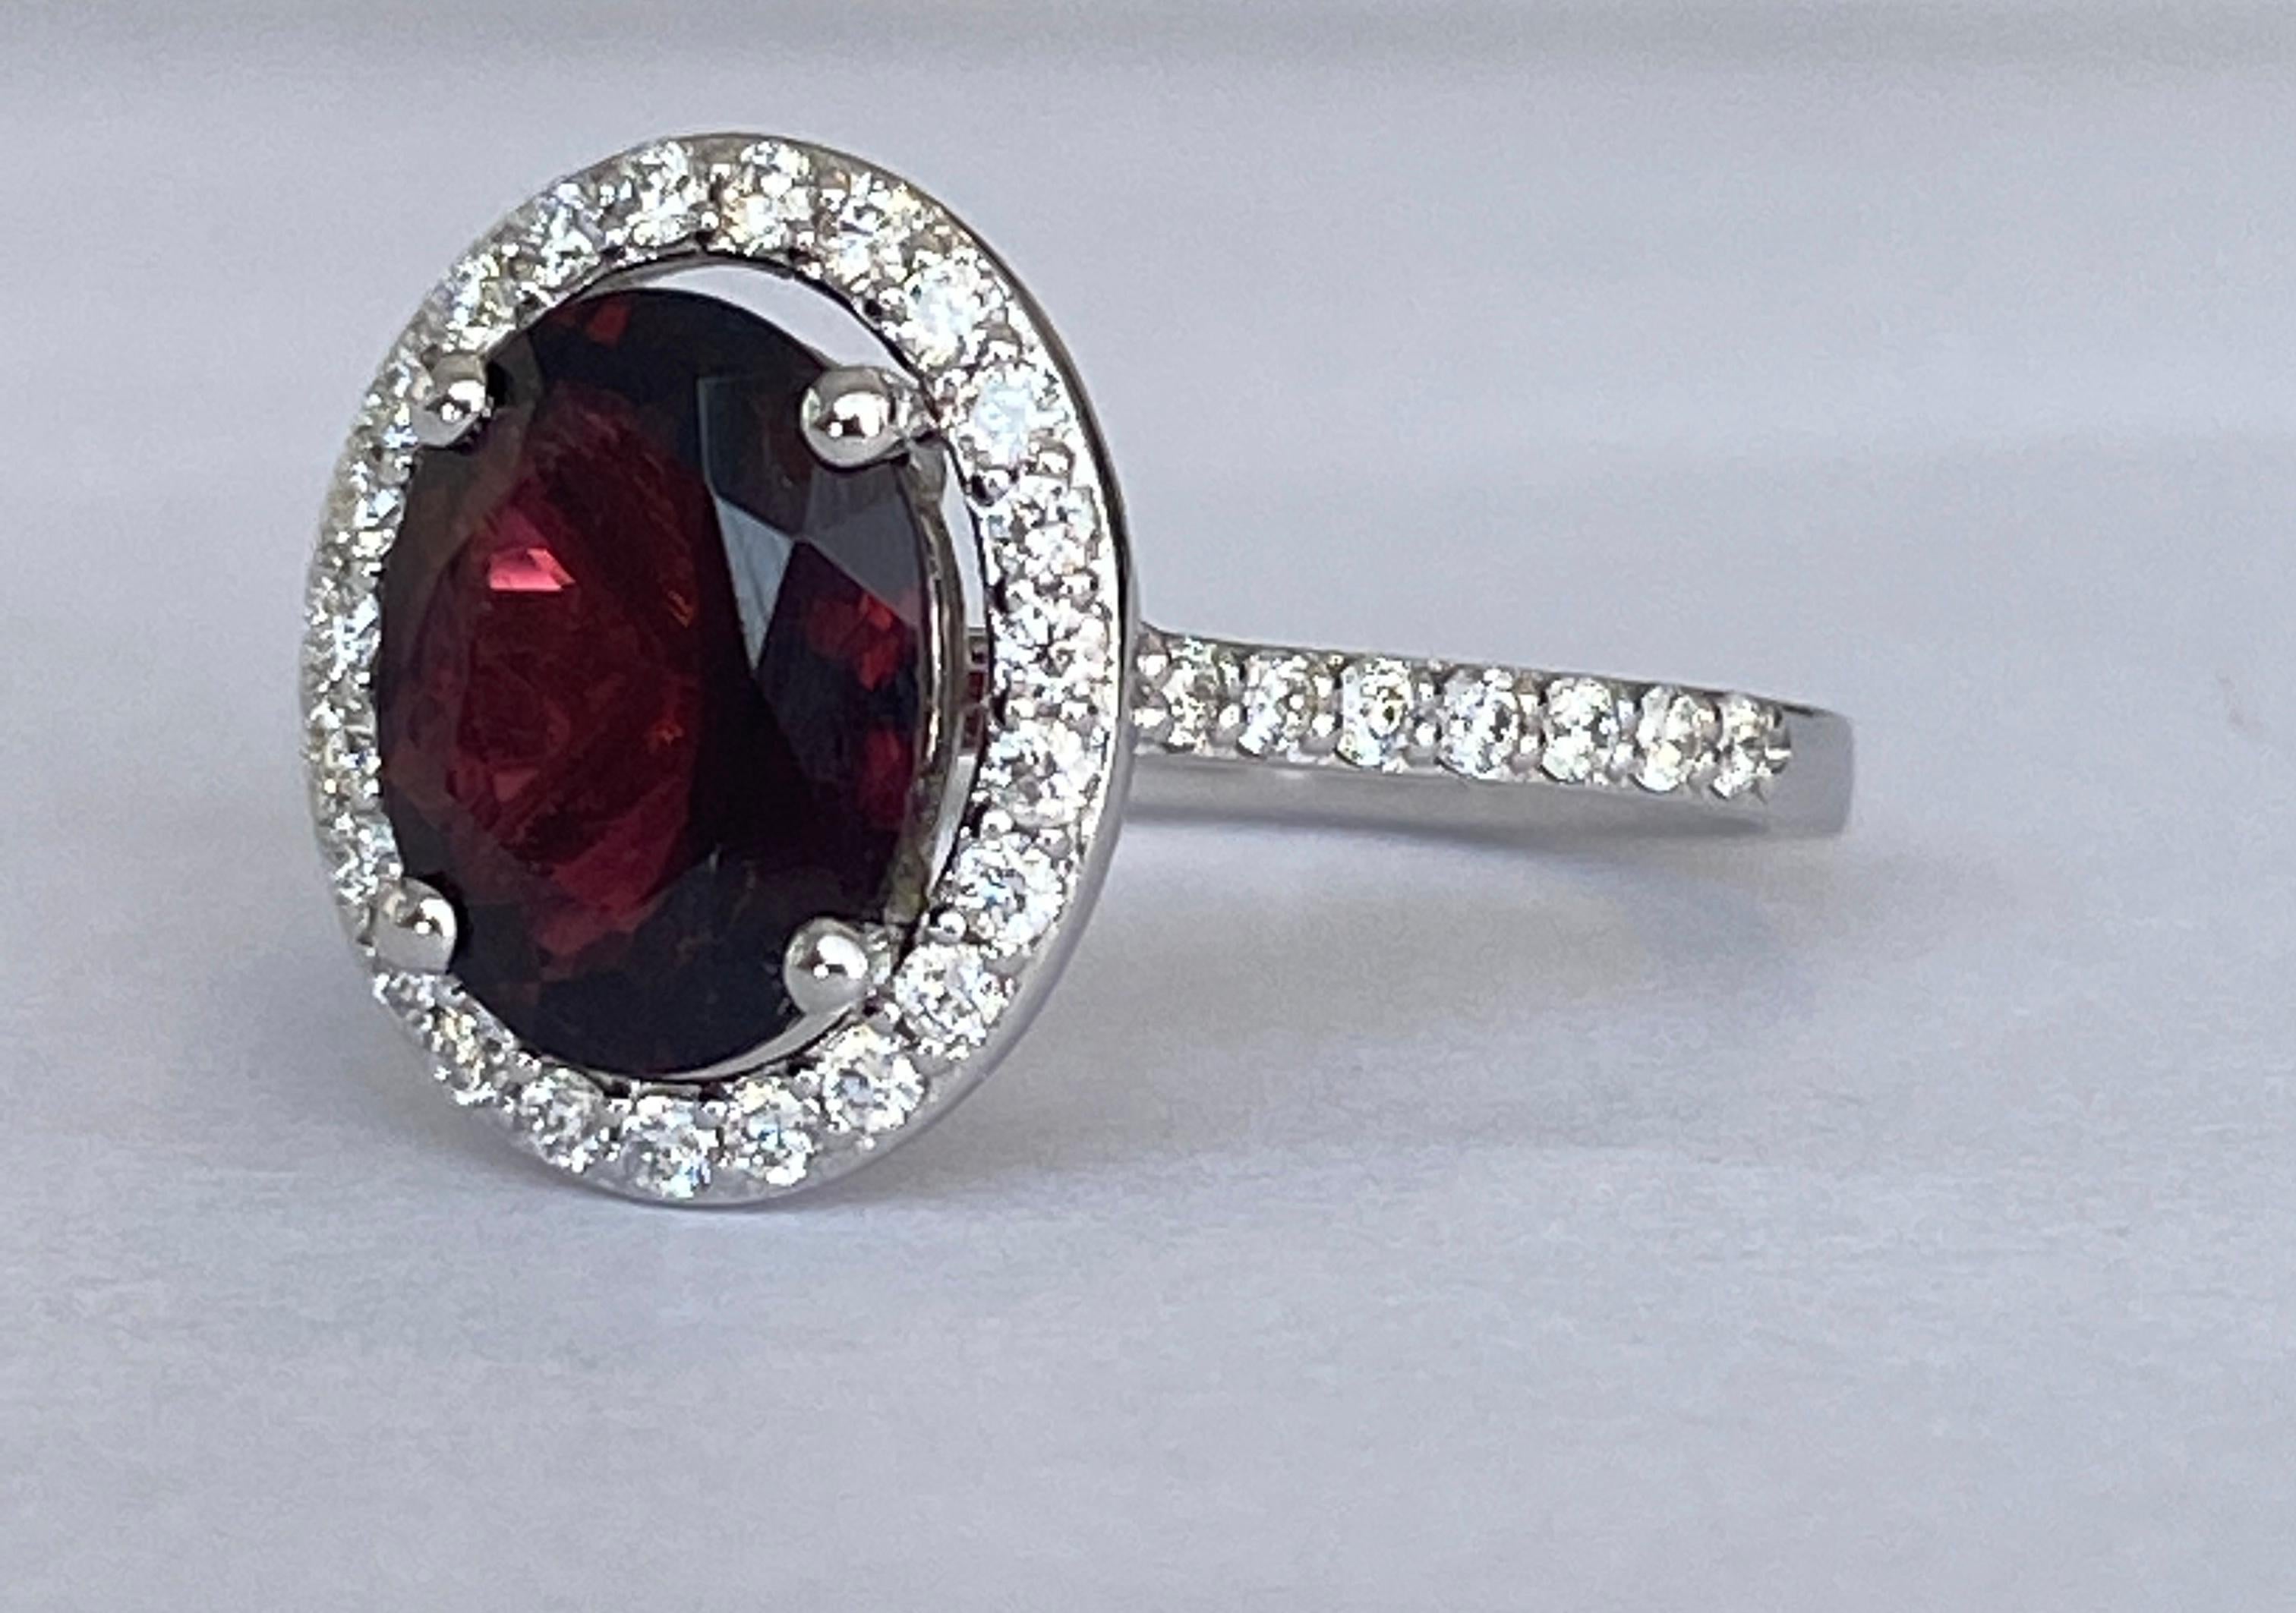 ALGT Certified 18 Carat White Gold 1.90 Carat Tourmaline Diamond Cocktail Ring For Sale 1